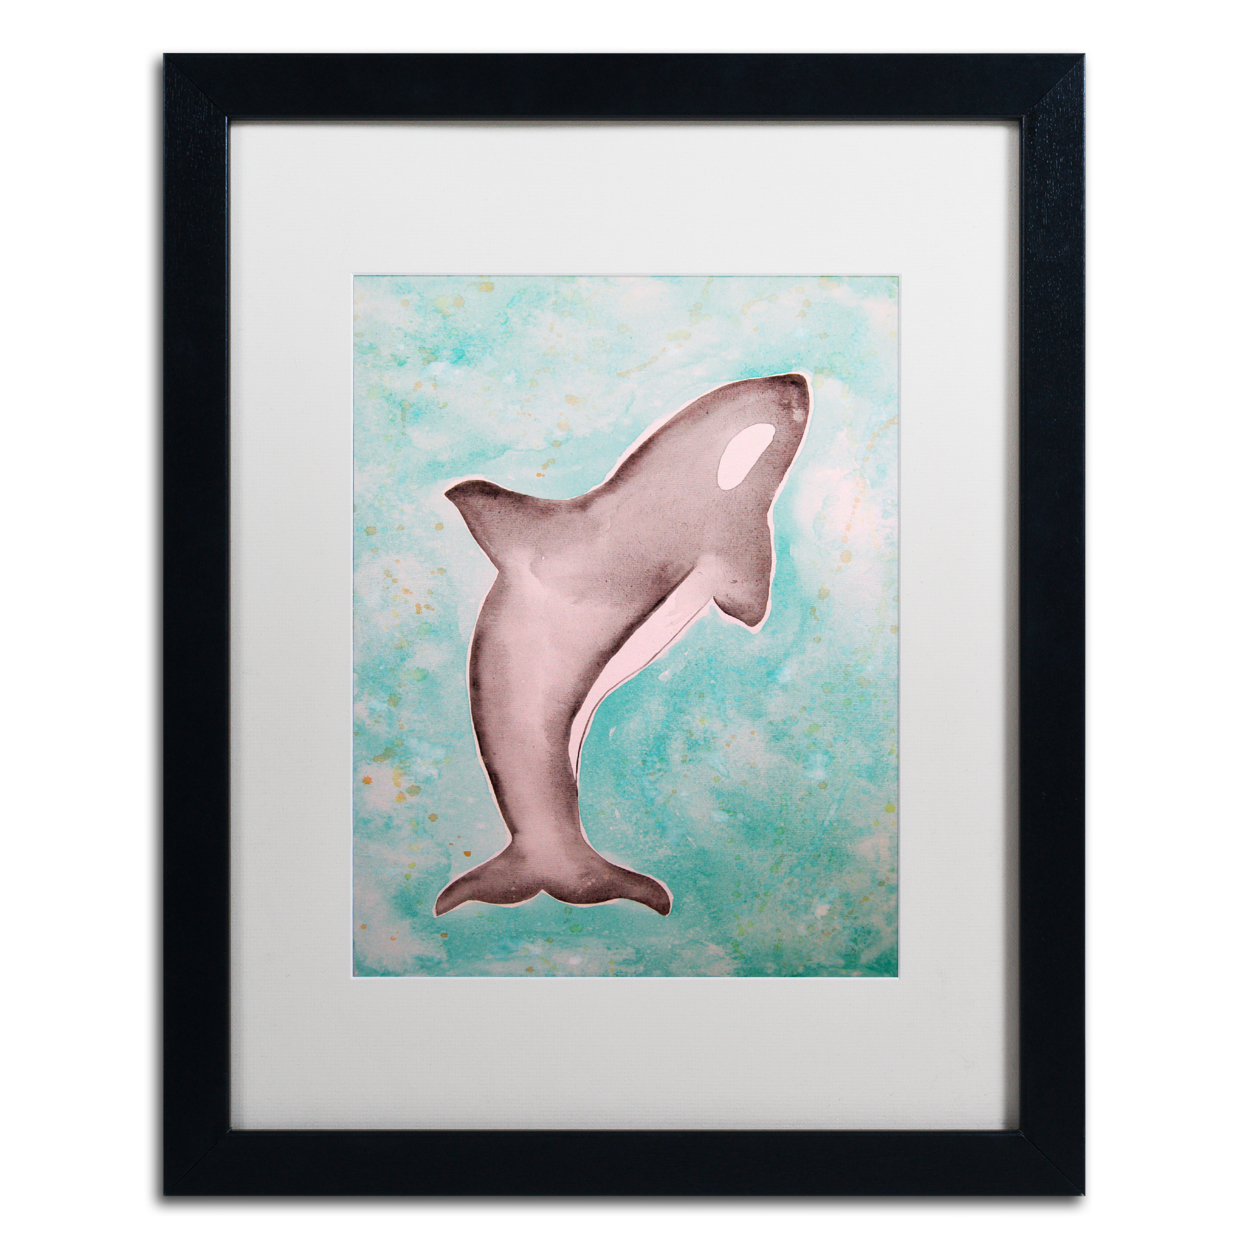 Nicole Dietz 'The Orca' Black Wooden Framed Art 18 X 22 Inches